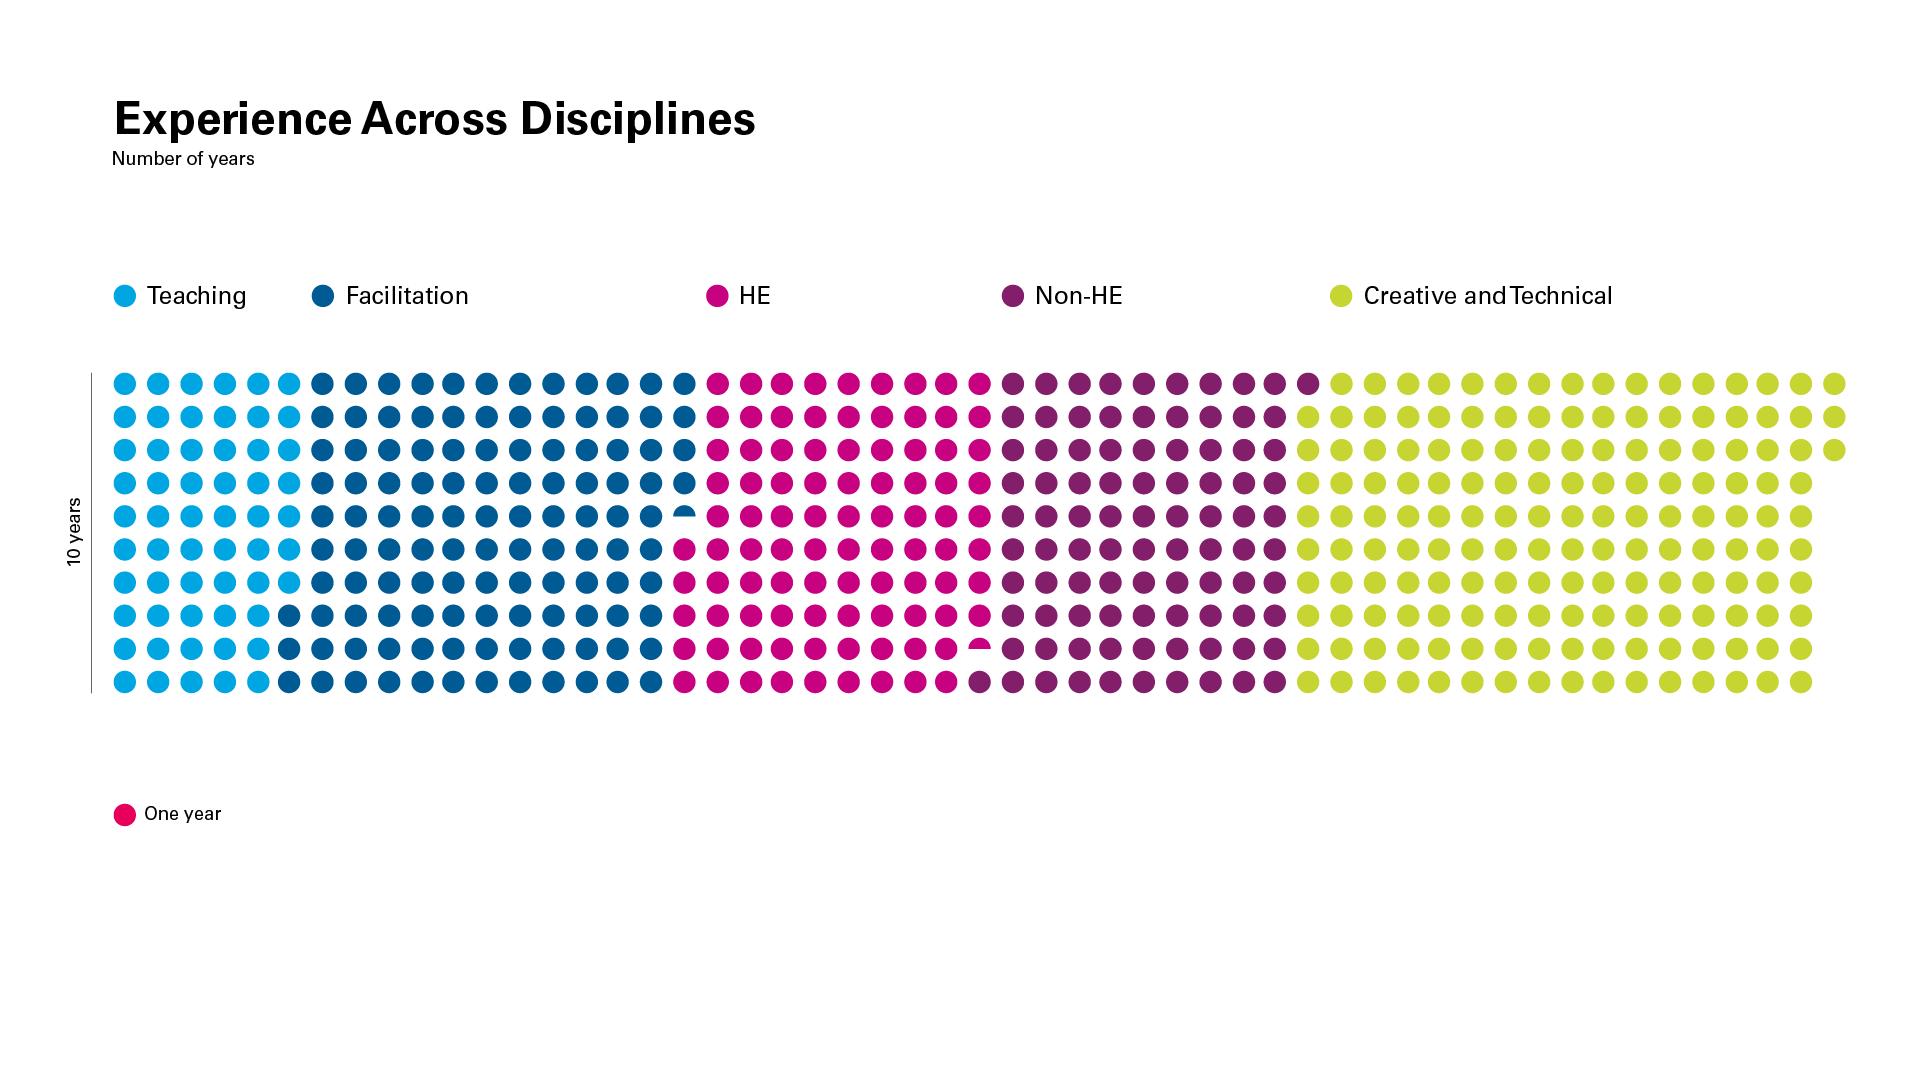 Data visualisation showing years of experience across disciplines.